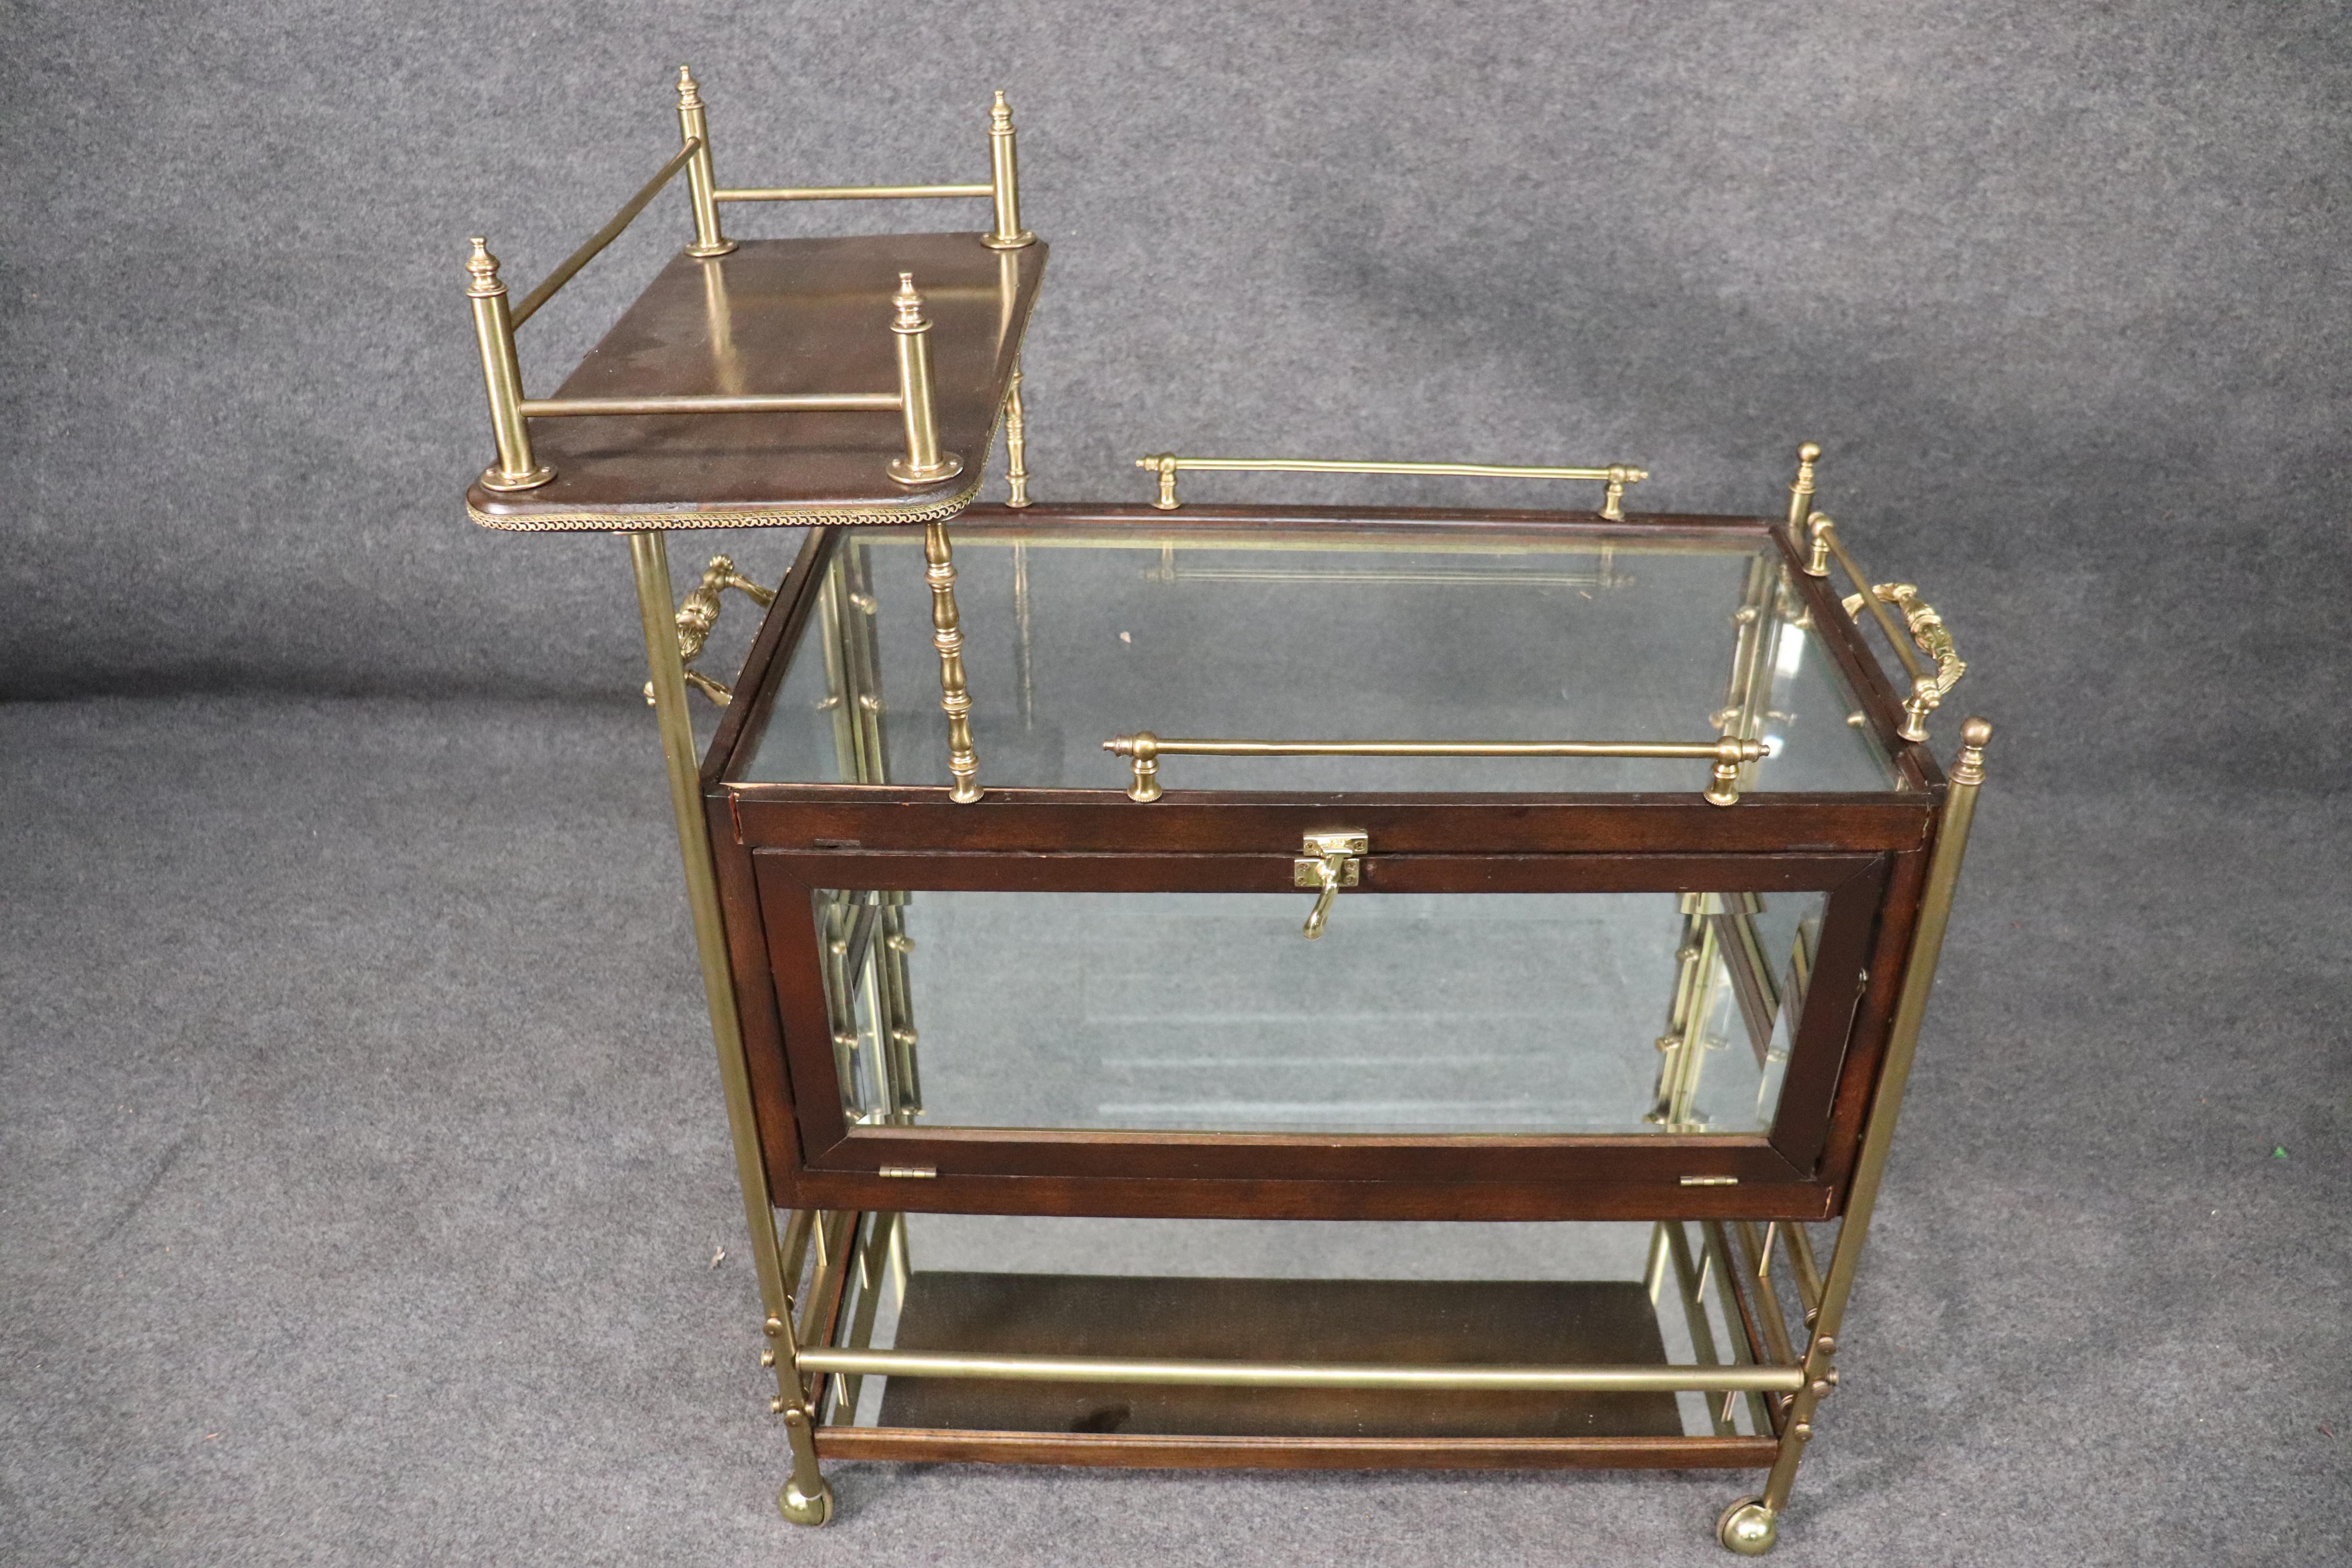 Regency Solid Mahogany and Solid Brass French Directoire Rolling Tea Cart Liquor Trolley